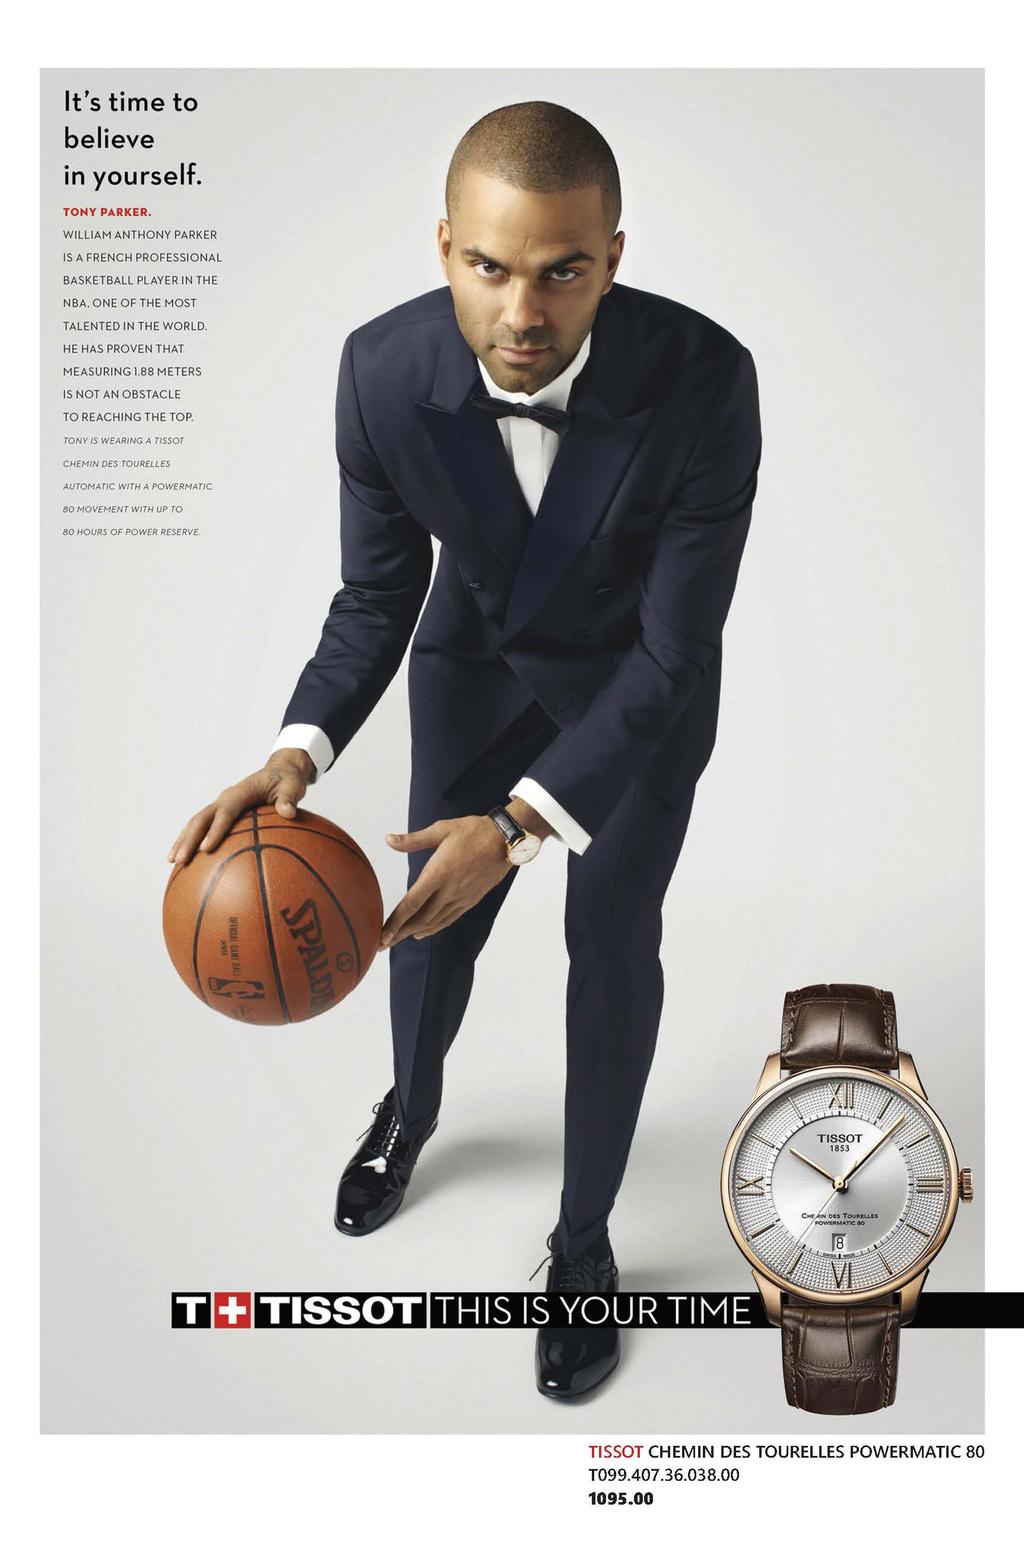 It's time to believe in yourself. TONY PARKER. WILLIAM ANTHONY PARKER IS A FRENCH PROFESSIONAL BASKETBALL PLAYER IN THE NBA. ONE OF THE MOST TALENTED IN THE WORLD.